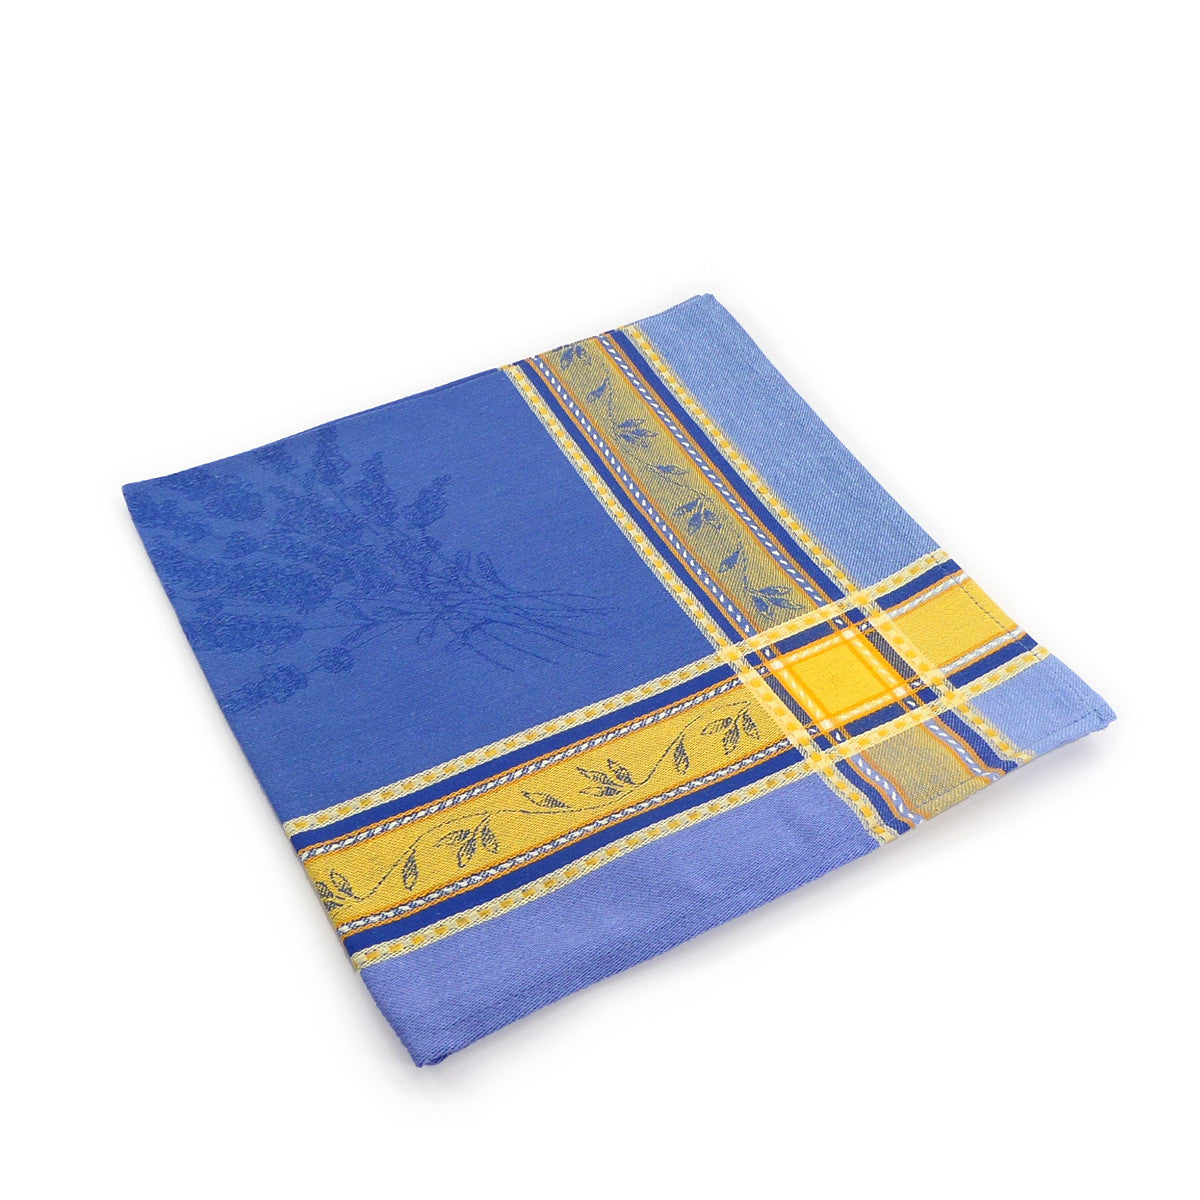 Colorful cotton dinner napkins in a beautiful Provencal jacquard